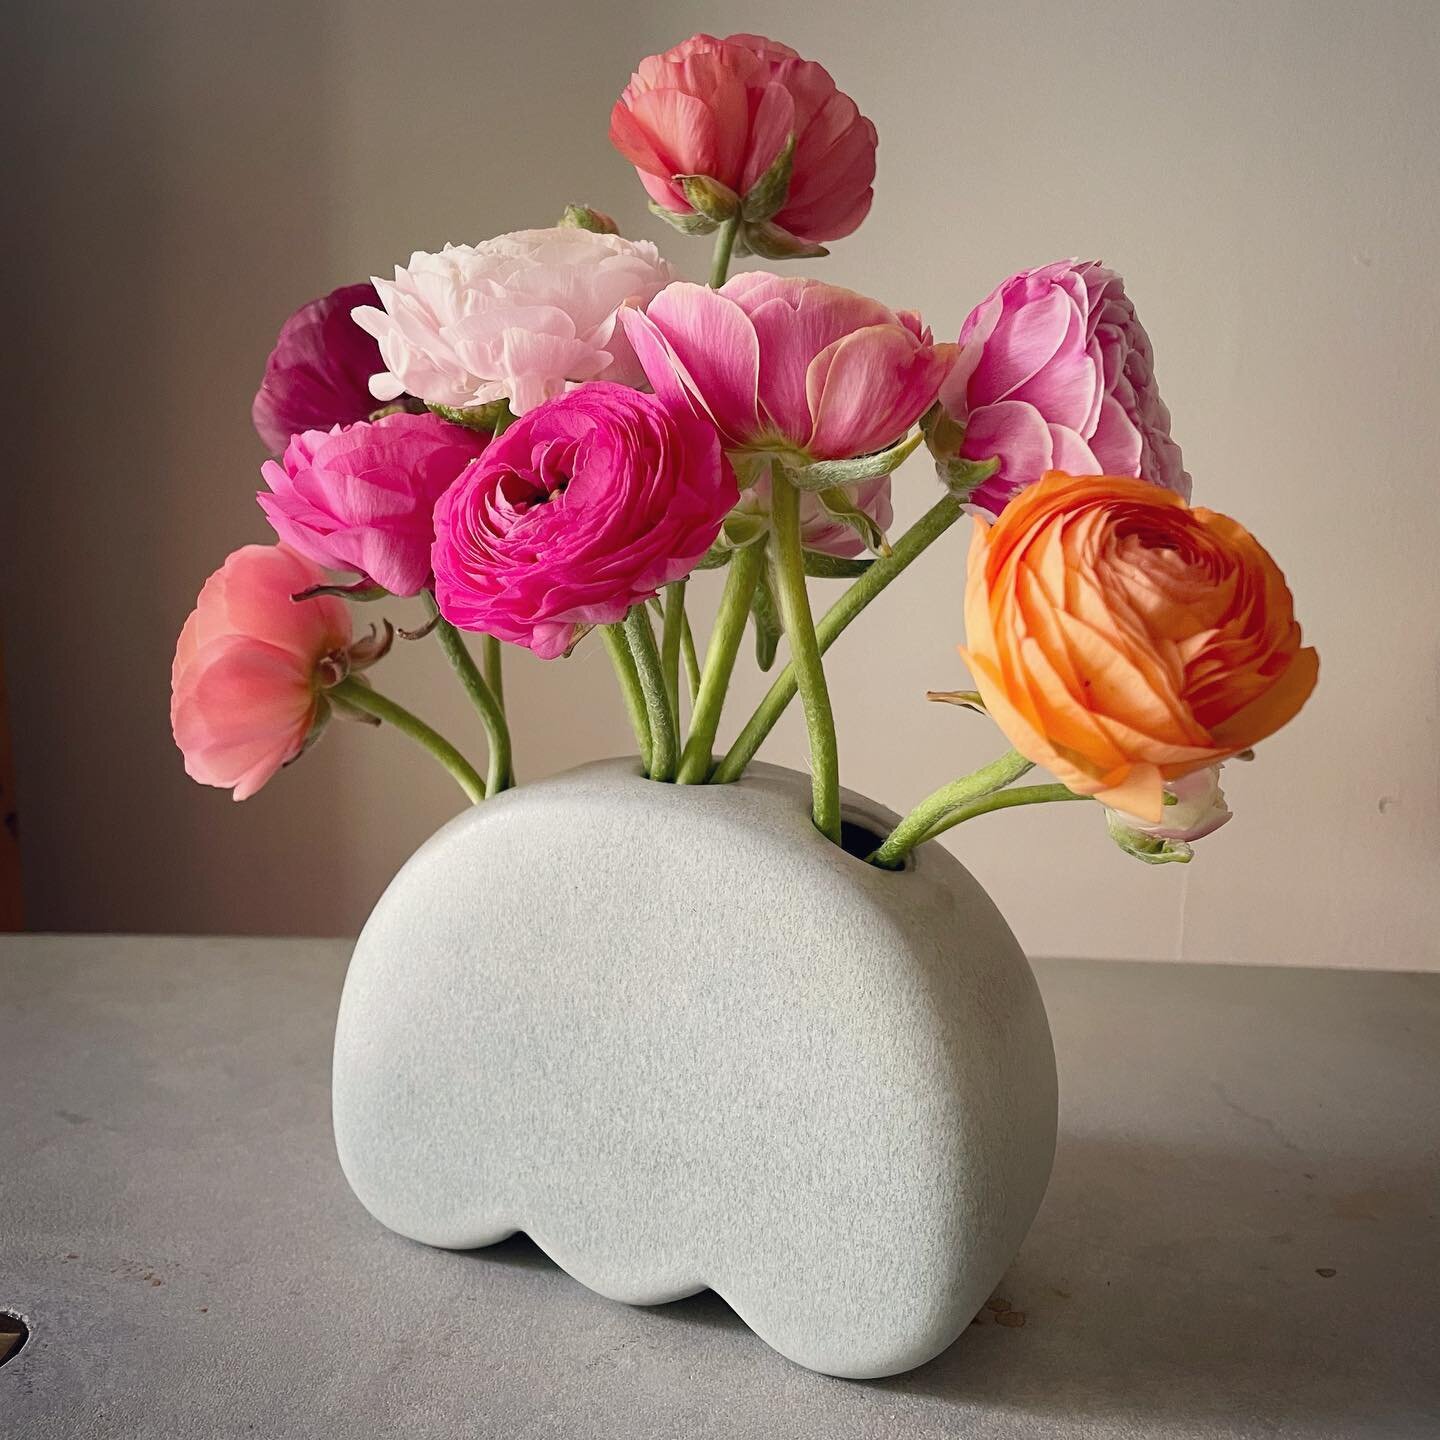 Come see @aurichio.ironworks and me during the Toe River Arts studio tour next month. I&rsquo;ll have a few of these bud bricks and some new lil things. June 2-4. Details 👉 @toeriverarts 

#slipcast #ranunculus #toeriverarts #toeriverstudiotour